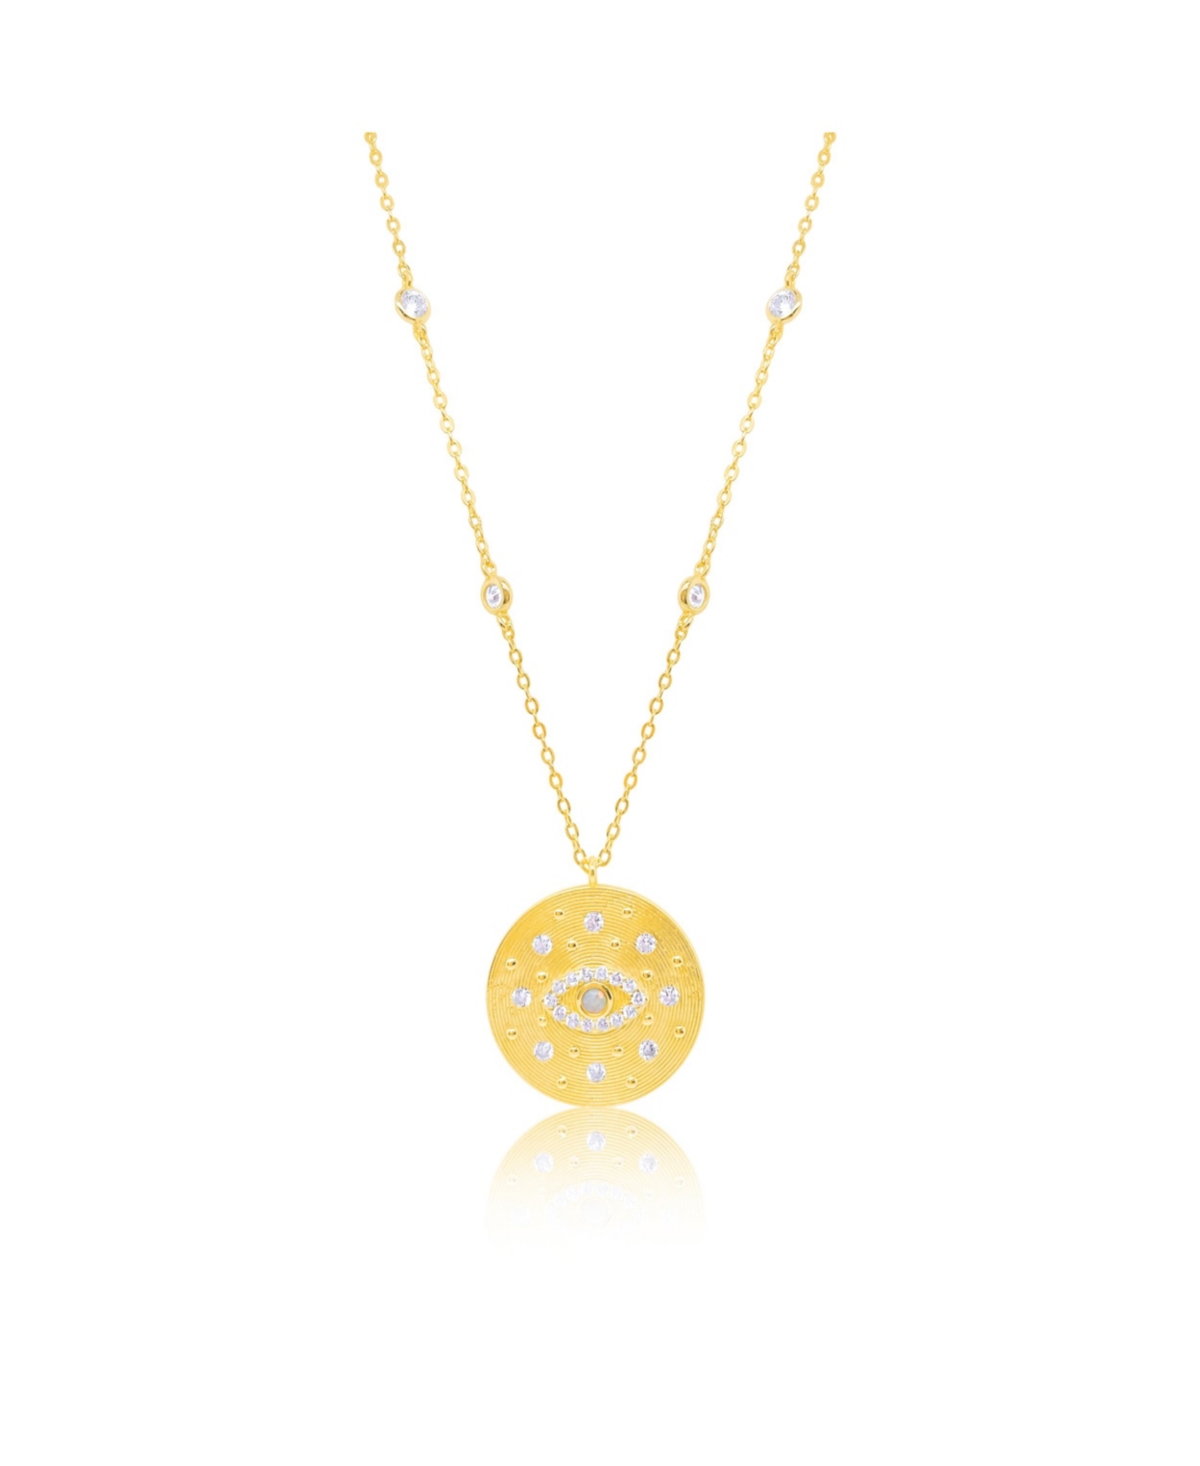 Yellow Gold Tone Cz Evil Eye Coin Necklace - Yellow